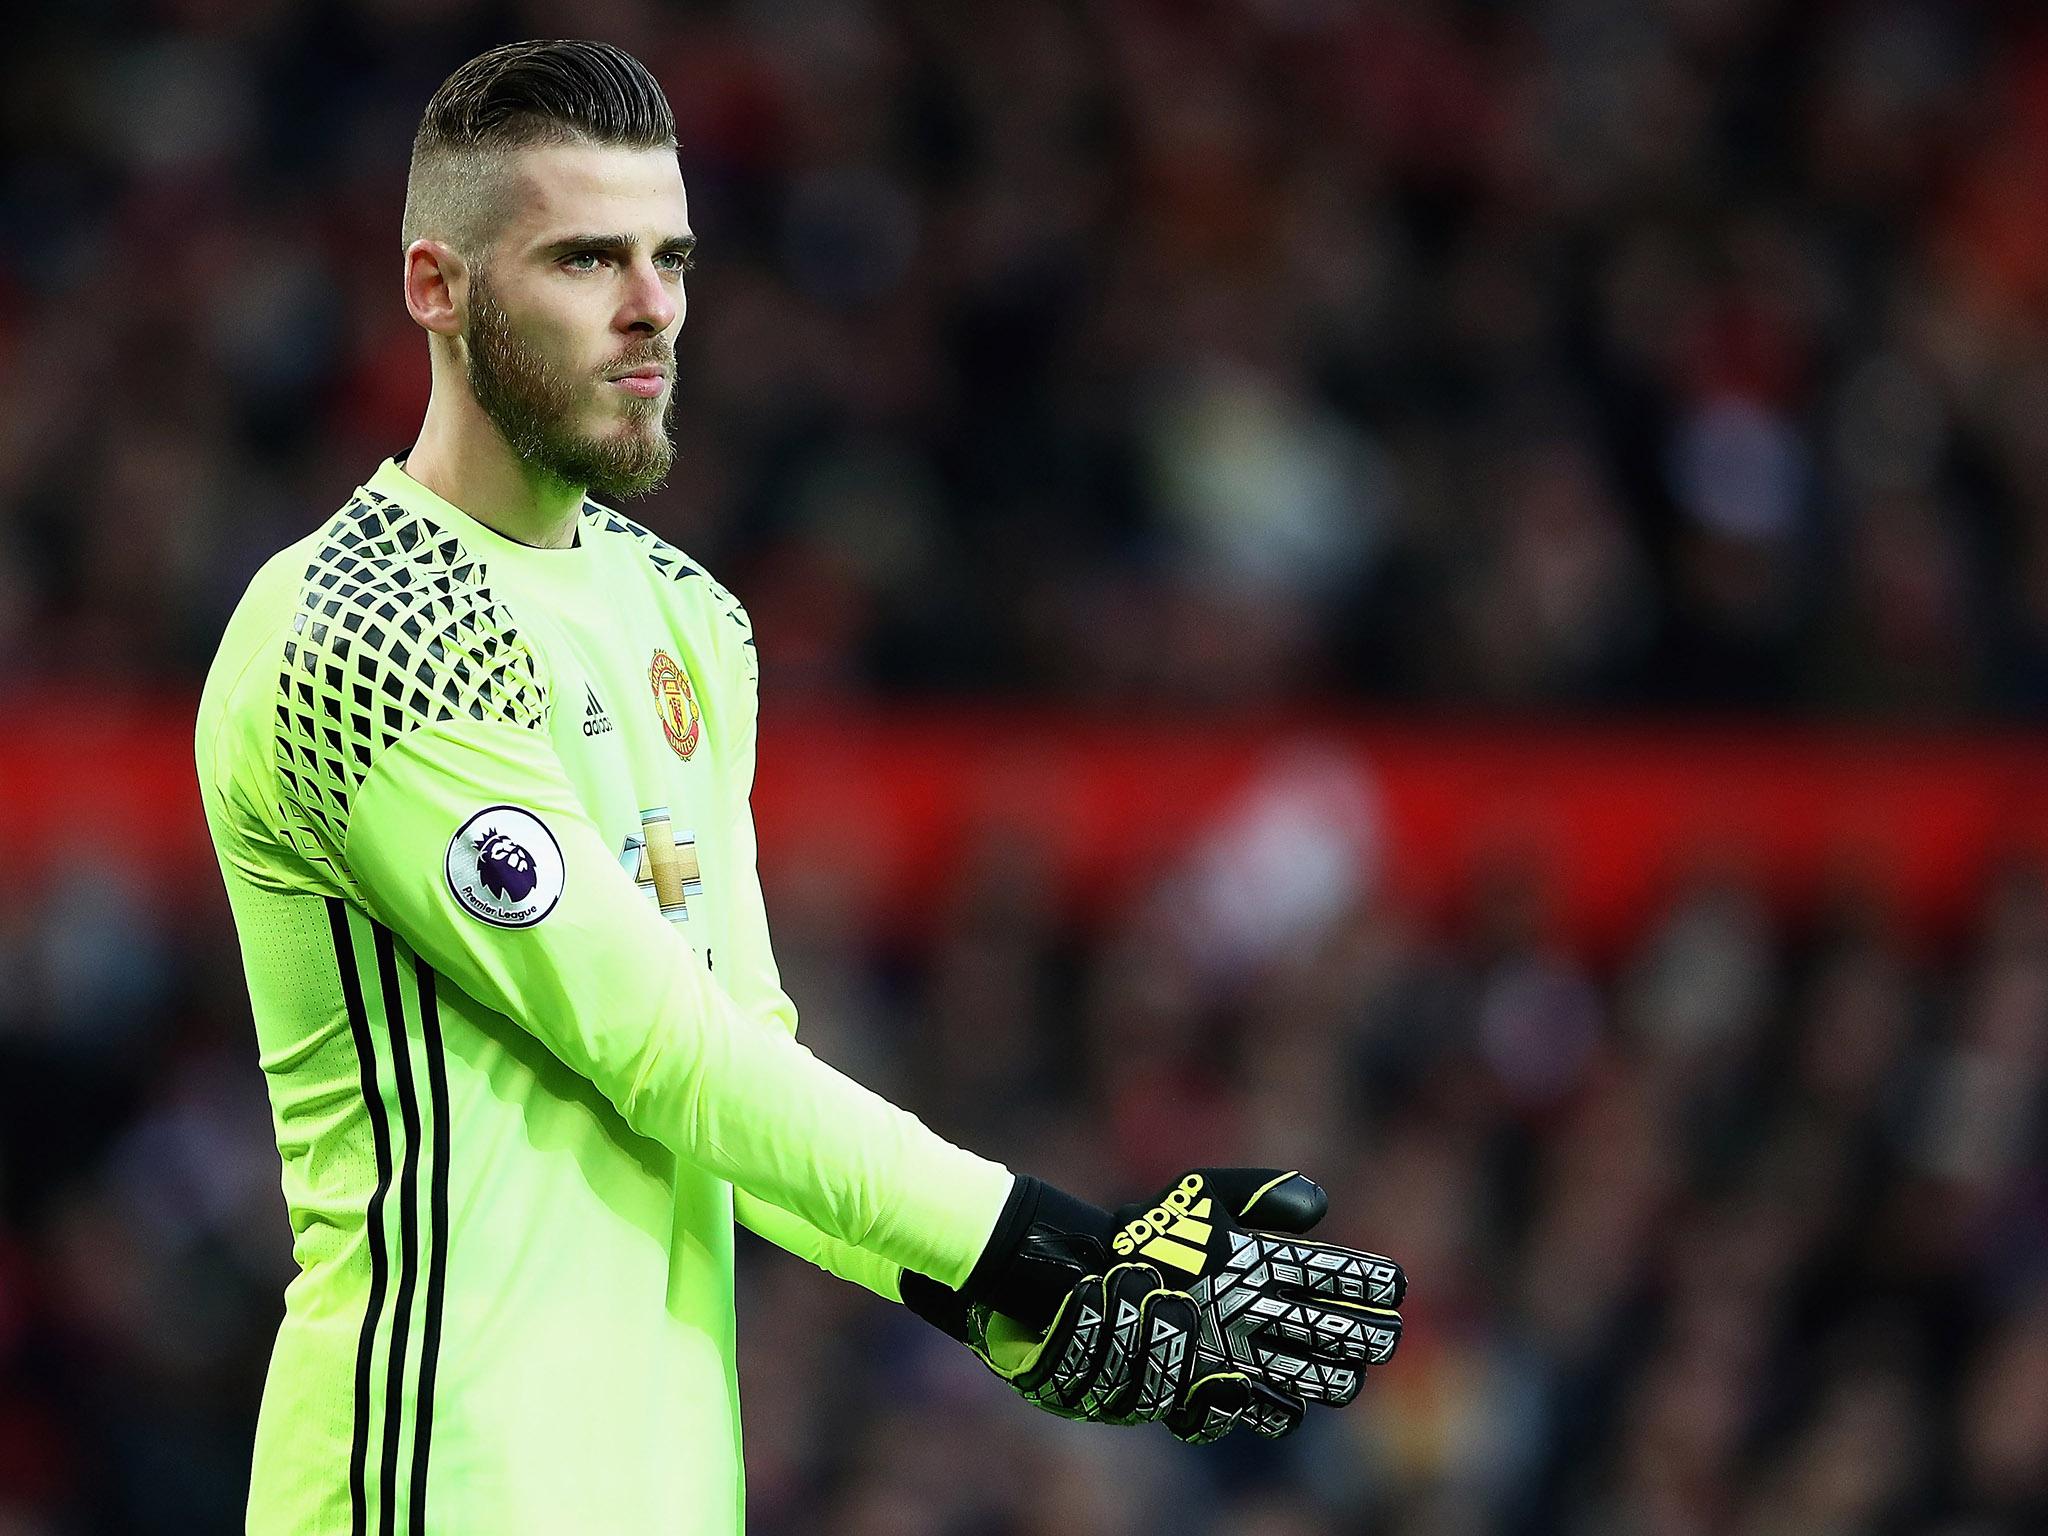 De Gea has made more than 250 appearances for United